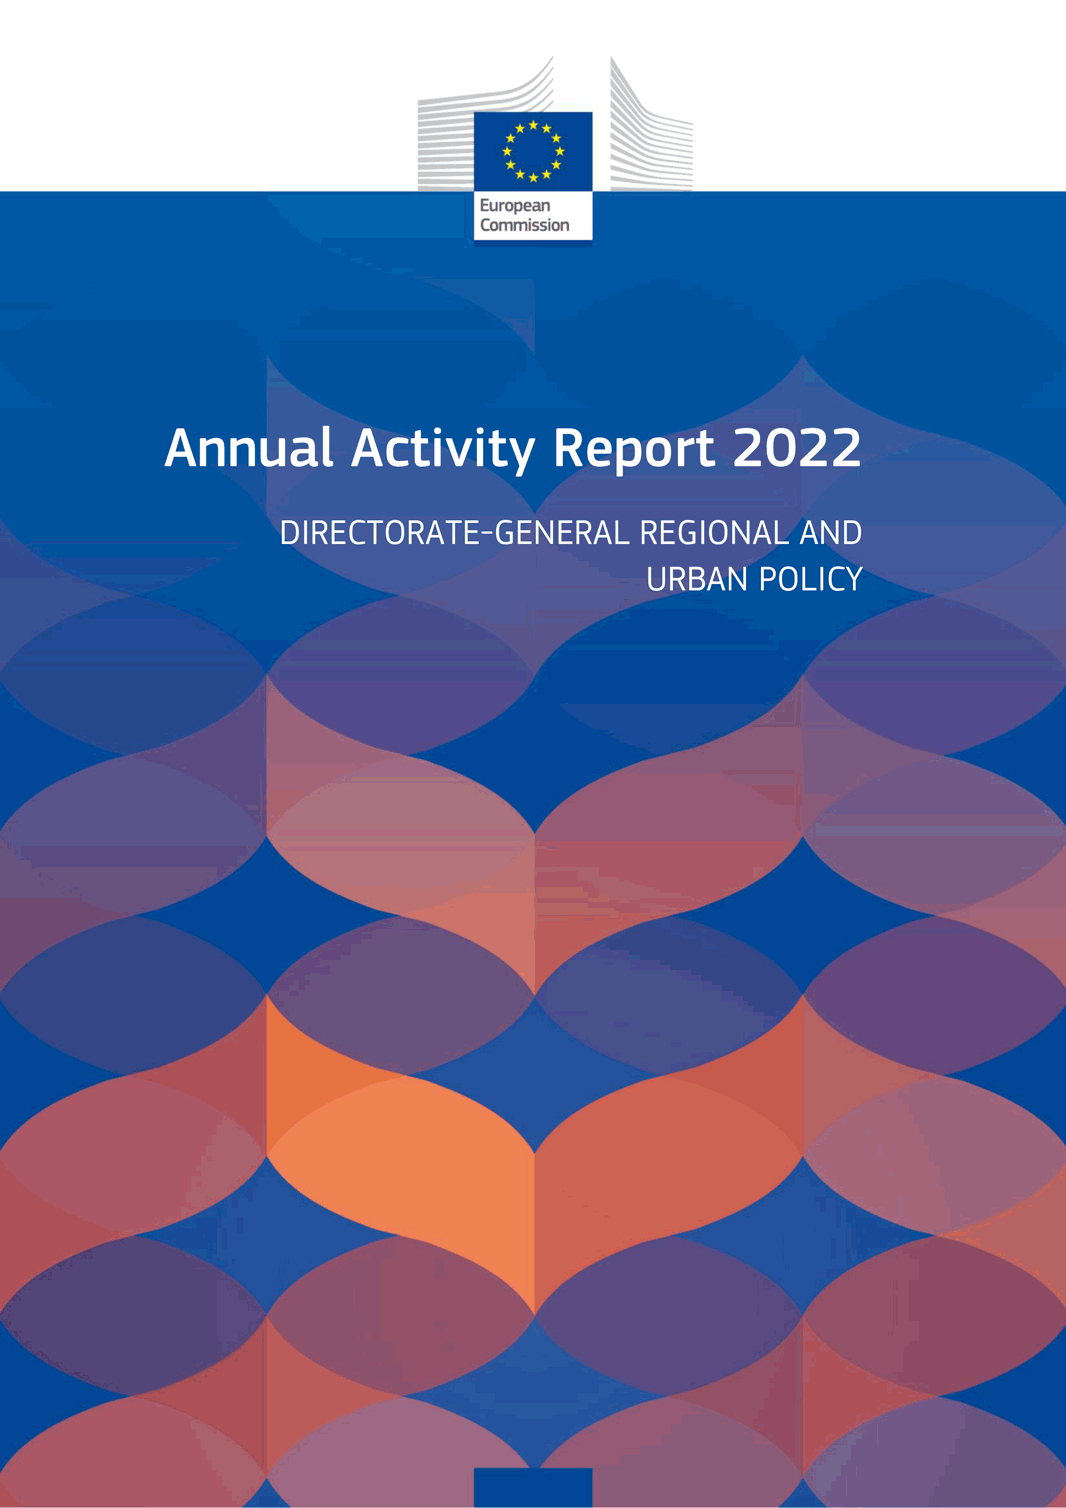 REGIO Annual Activity Report for 2022 published